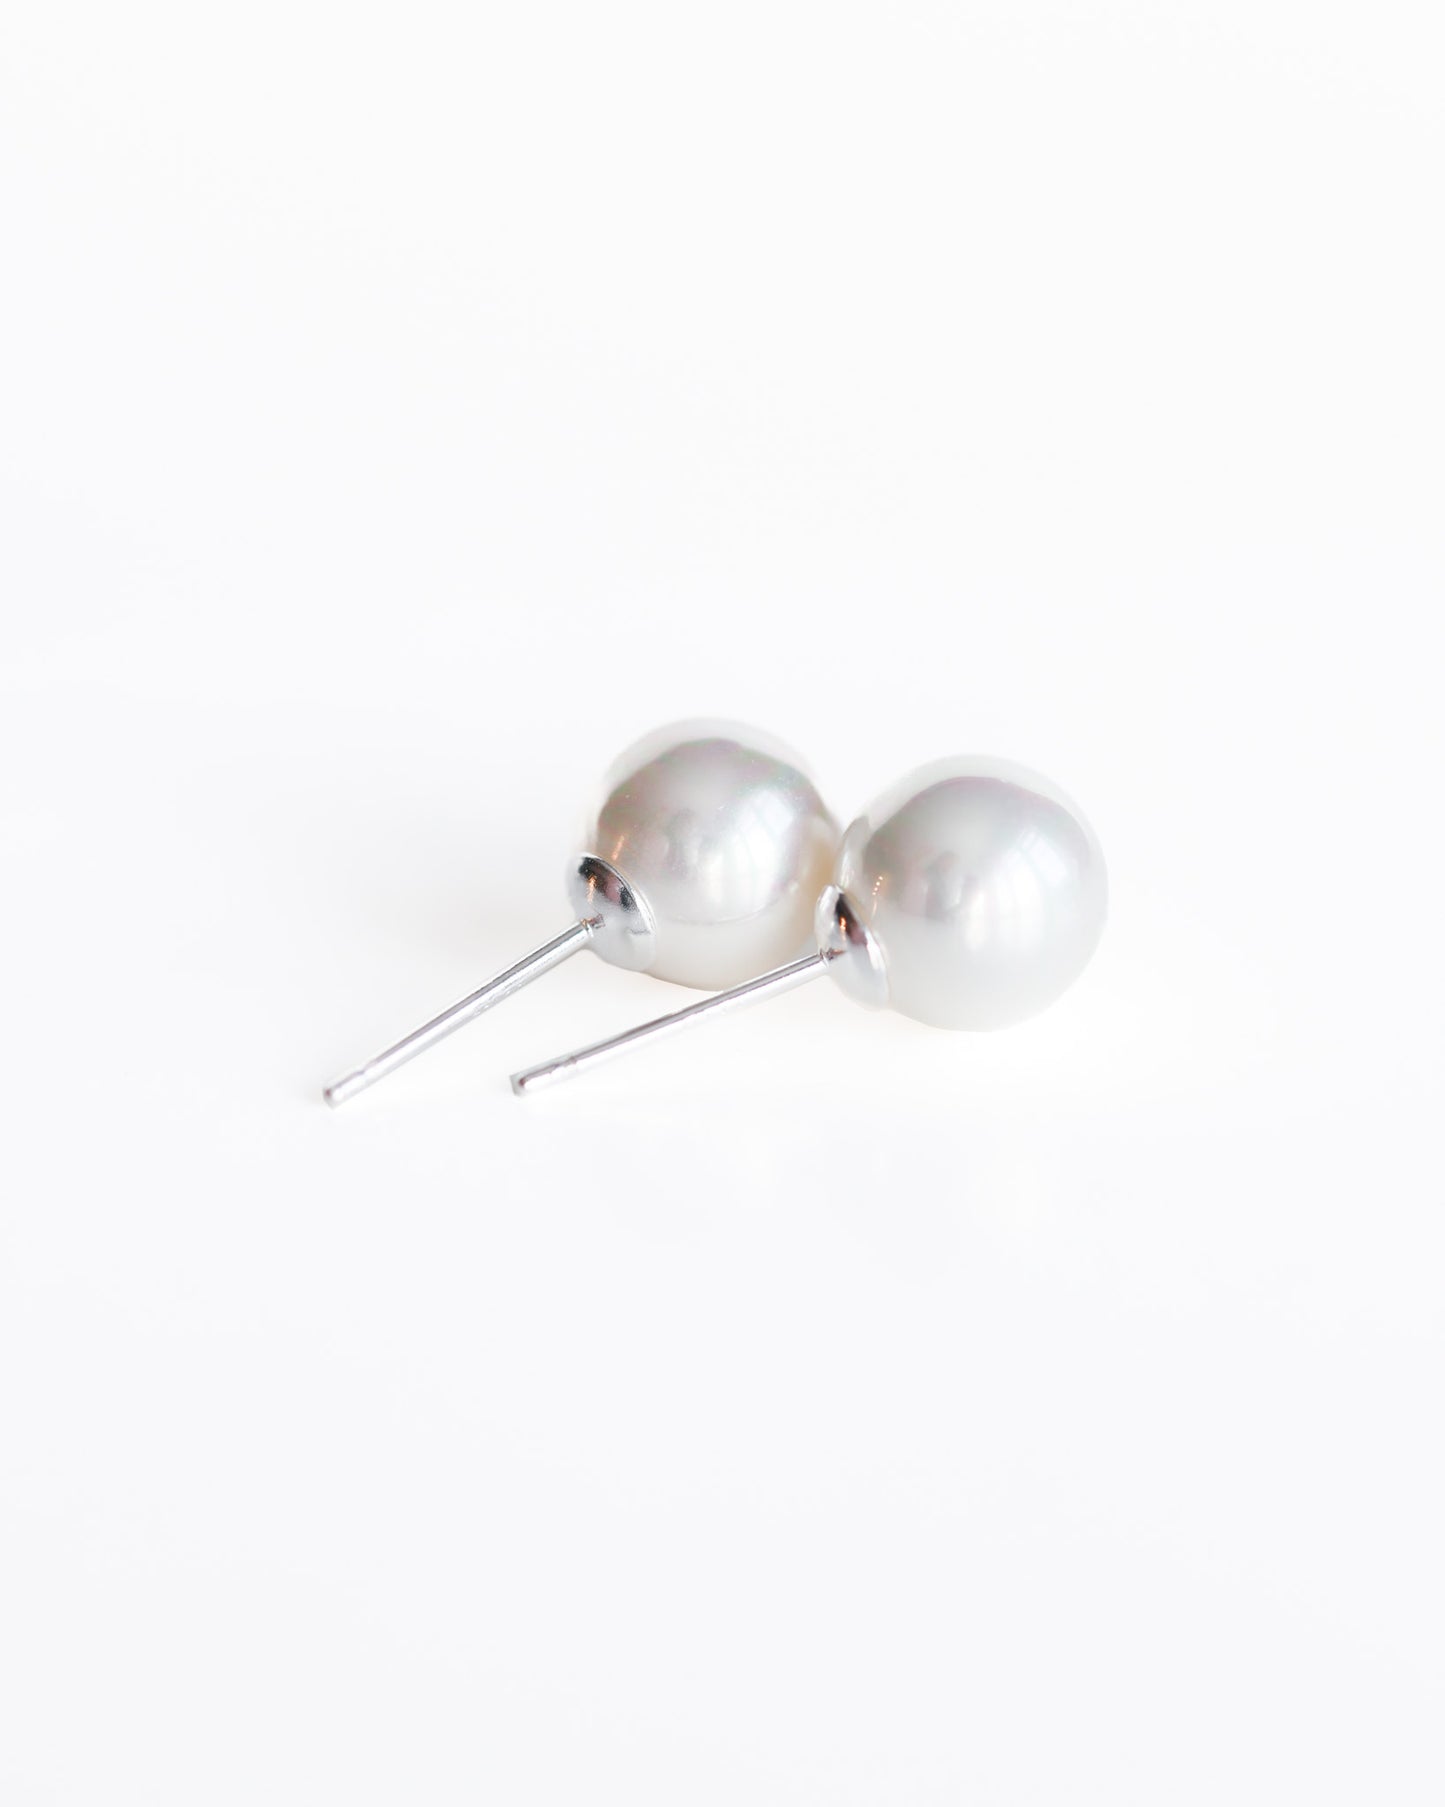 8mm Pearl Stud Earrings with silver posts